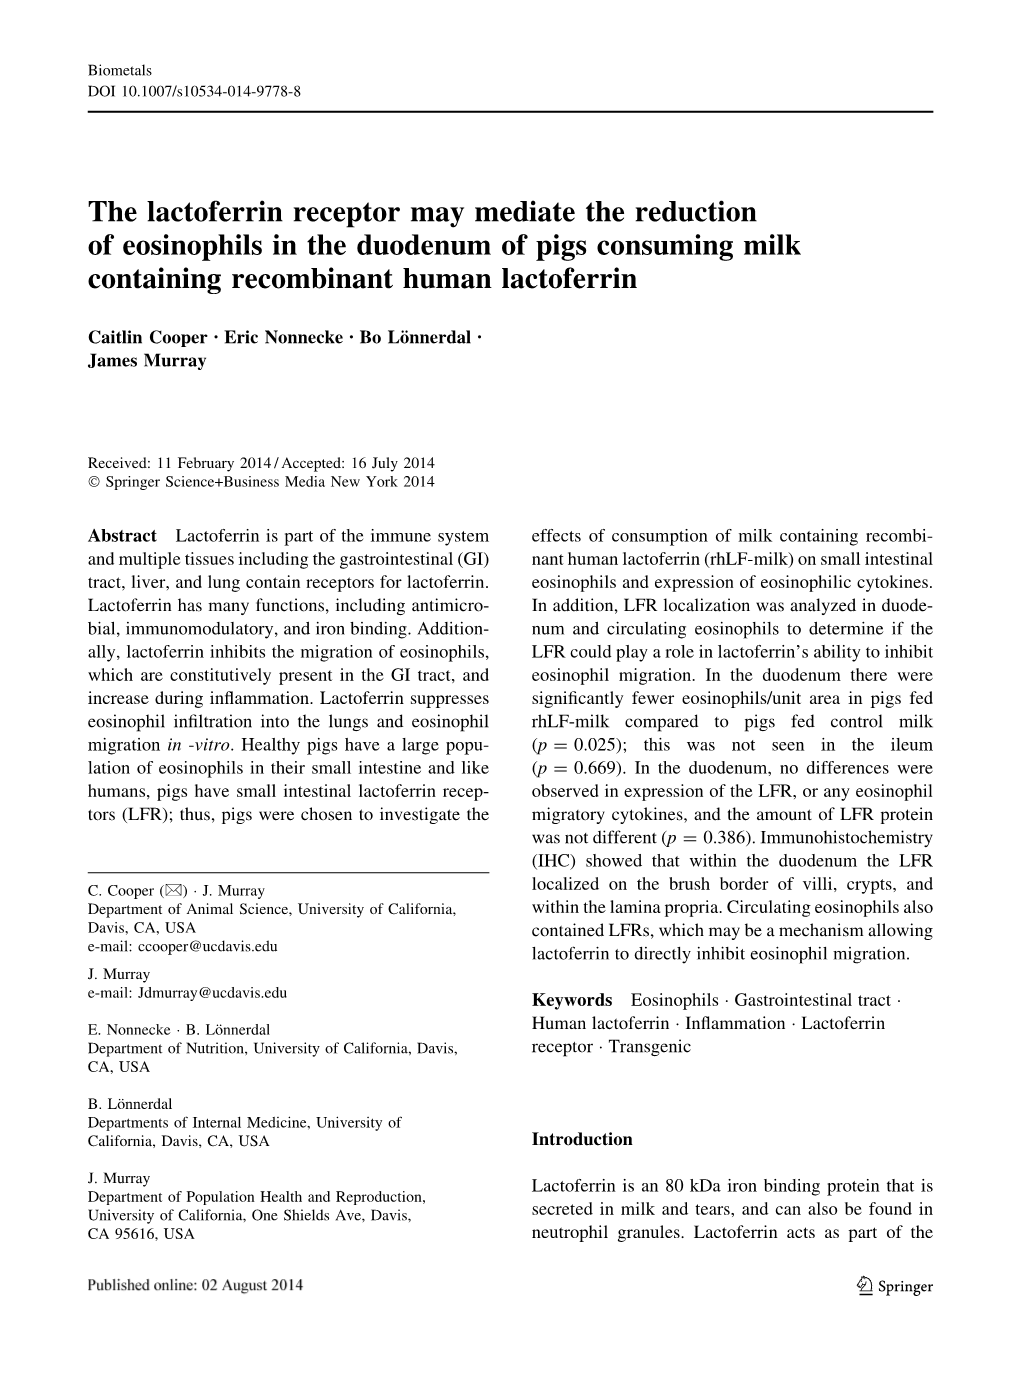 The Lactoferrin Receptor May Mediate the Reduction of Eosinophils in the Duodenum of Pigs Consuming Milk Containing Recombinant Human Lactoferrin